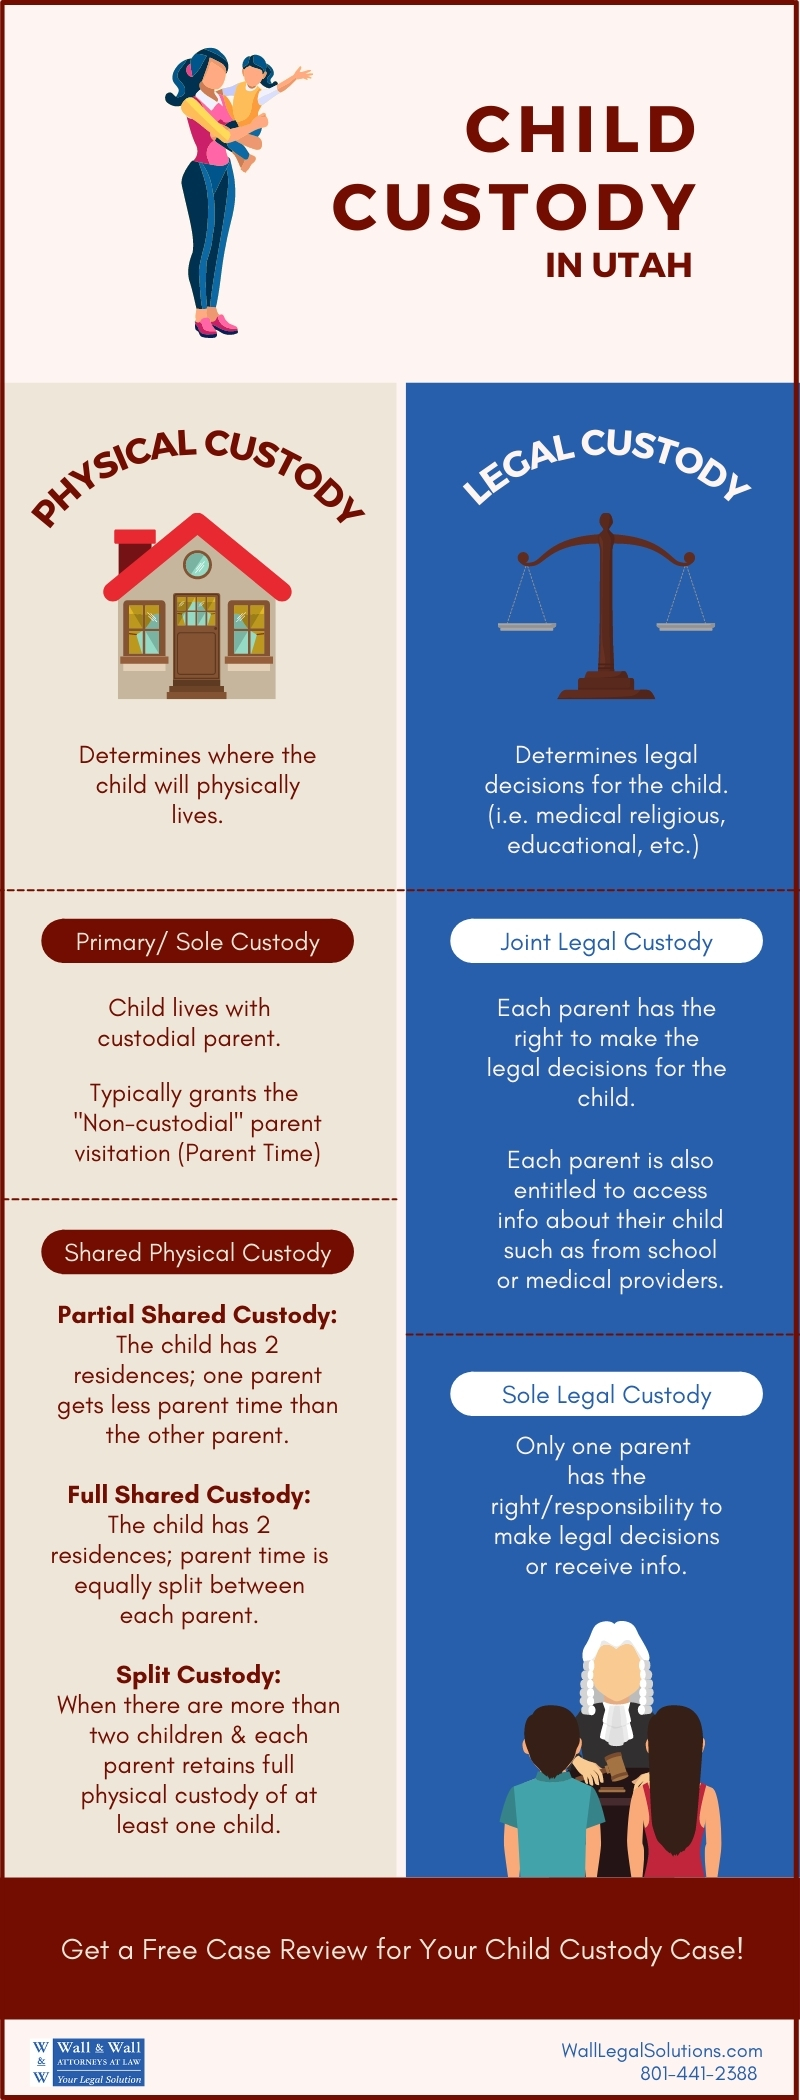 Child custody in Utah infographic - What is joint physical custody